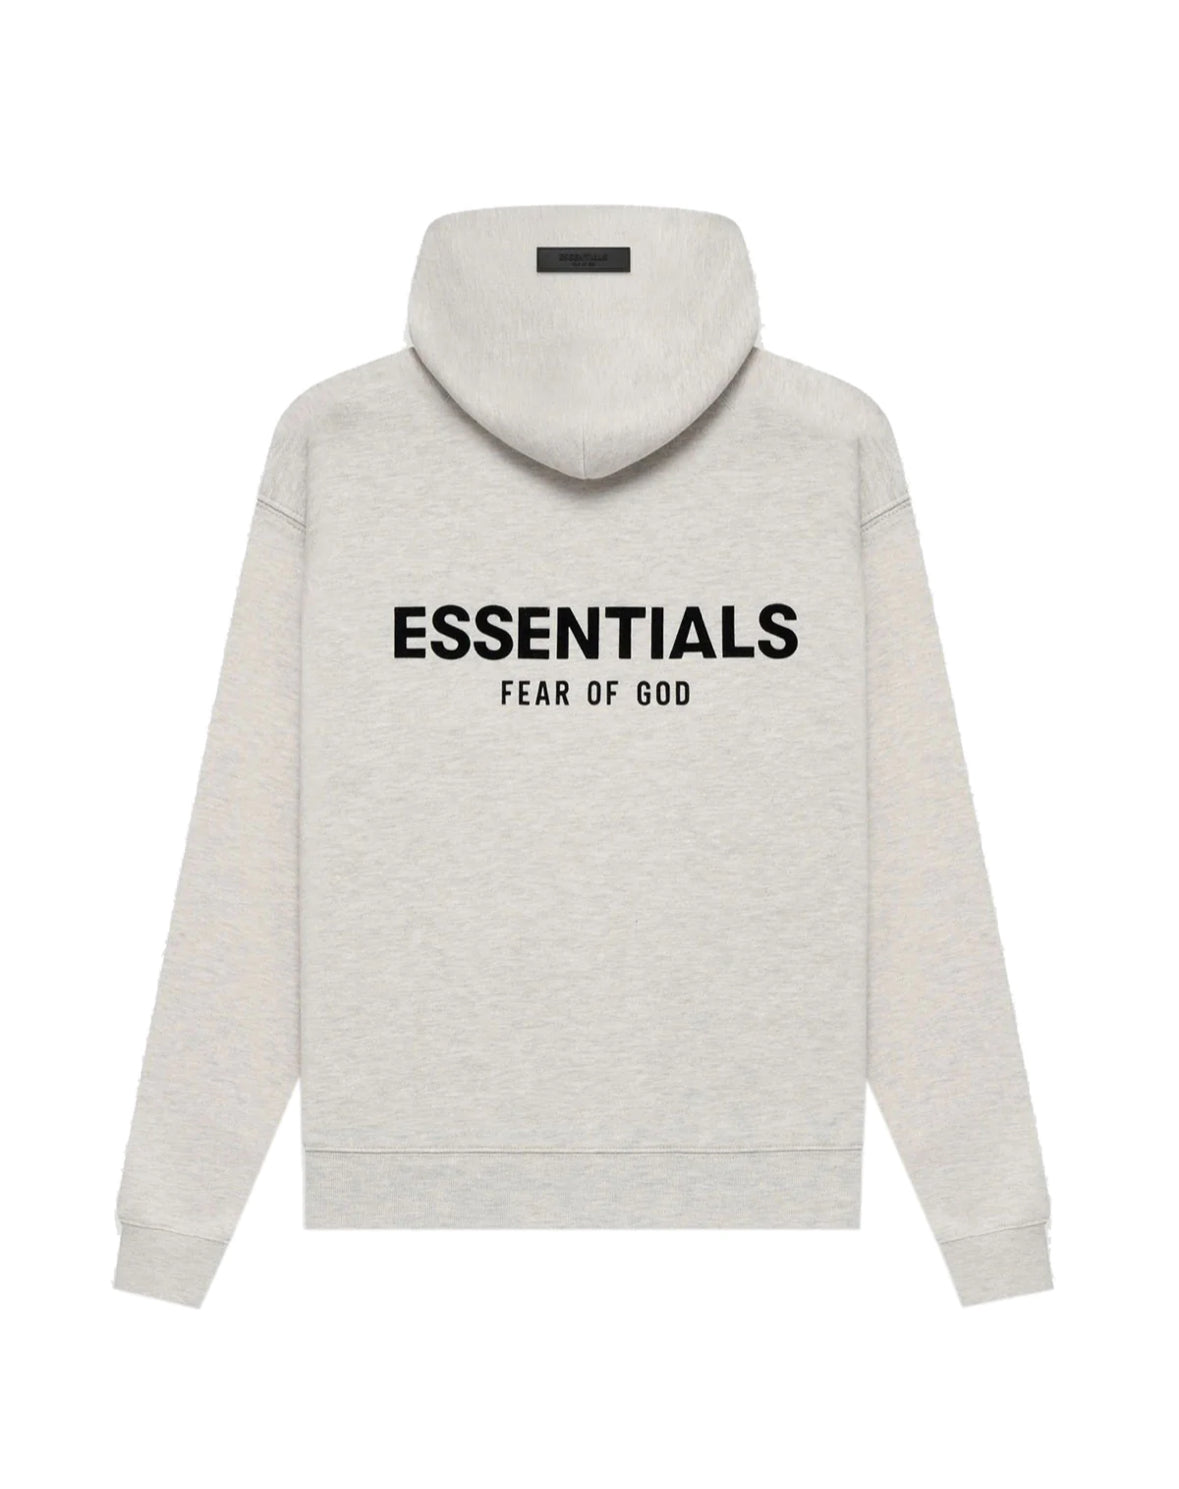 ESSENTIALS Hoodie                         Core collection